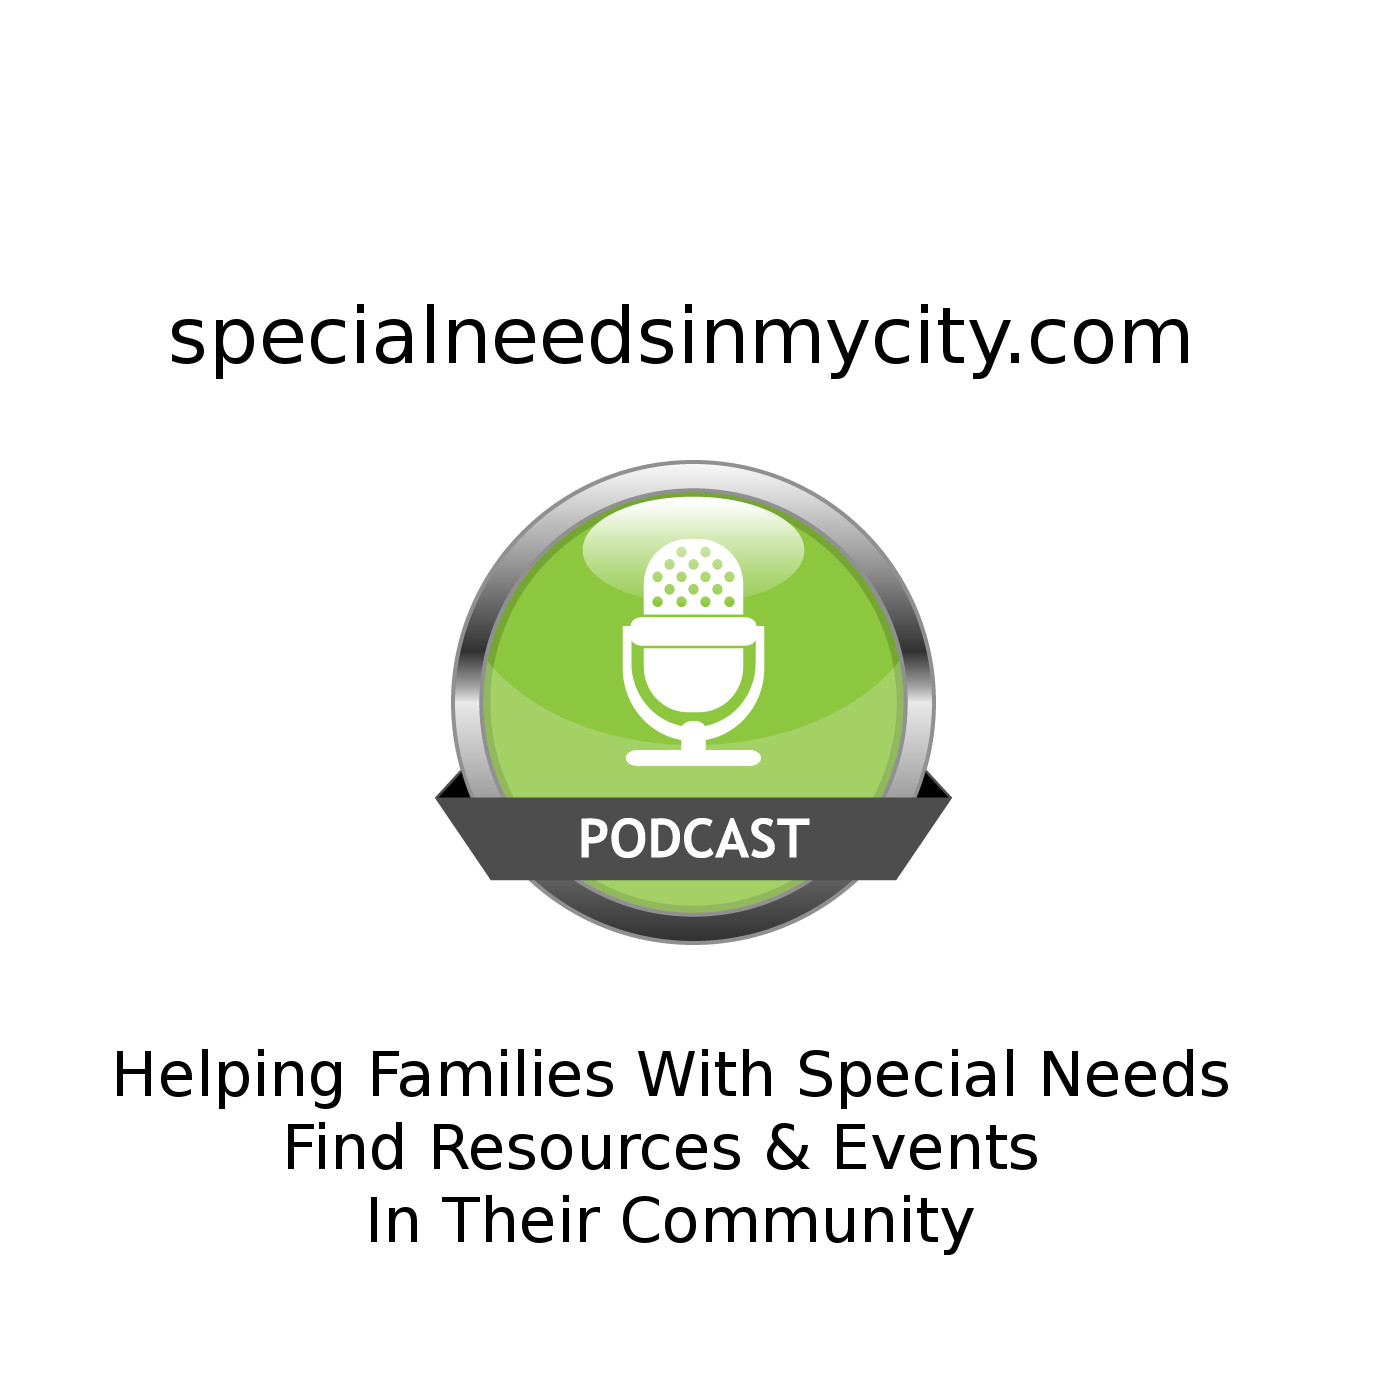 Specialneedsinmycity Podcast with Meena Tadimeti |Chats with Top-Notch Medical Experts and Warrior Parents about Special Needs